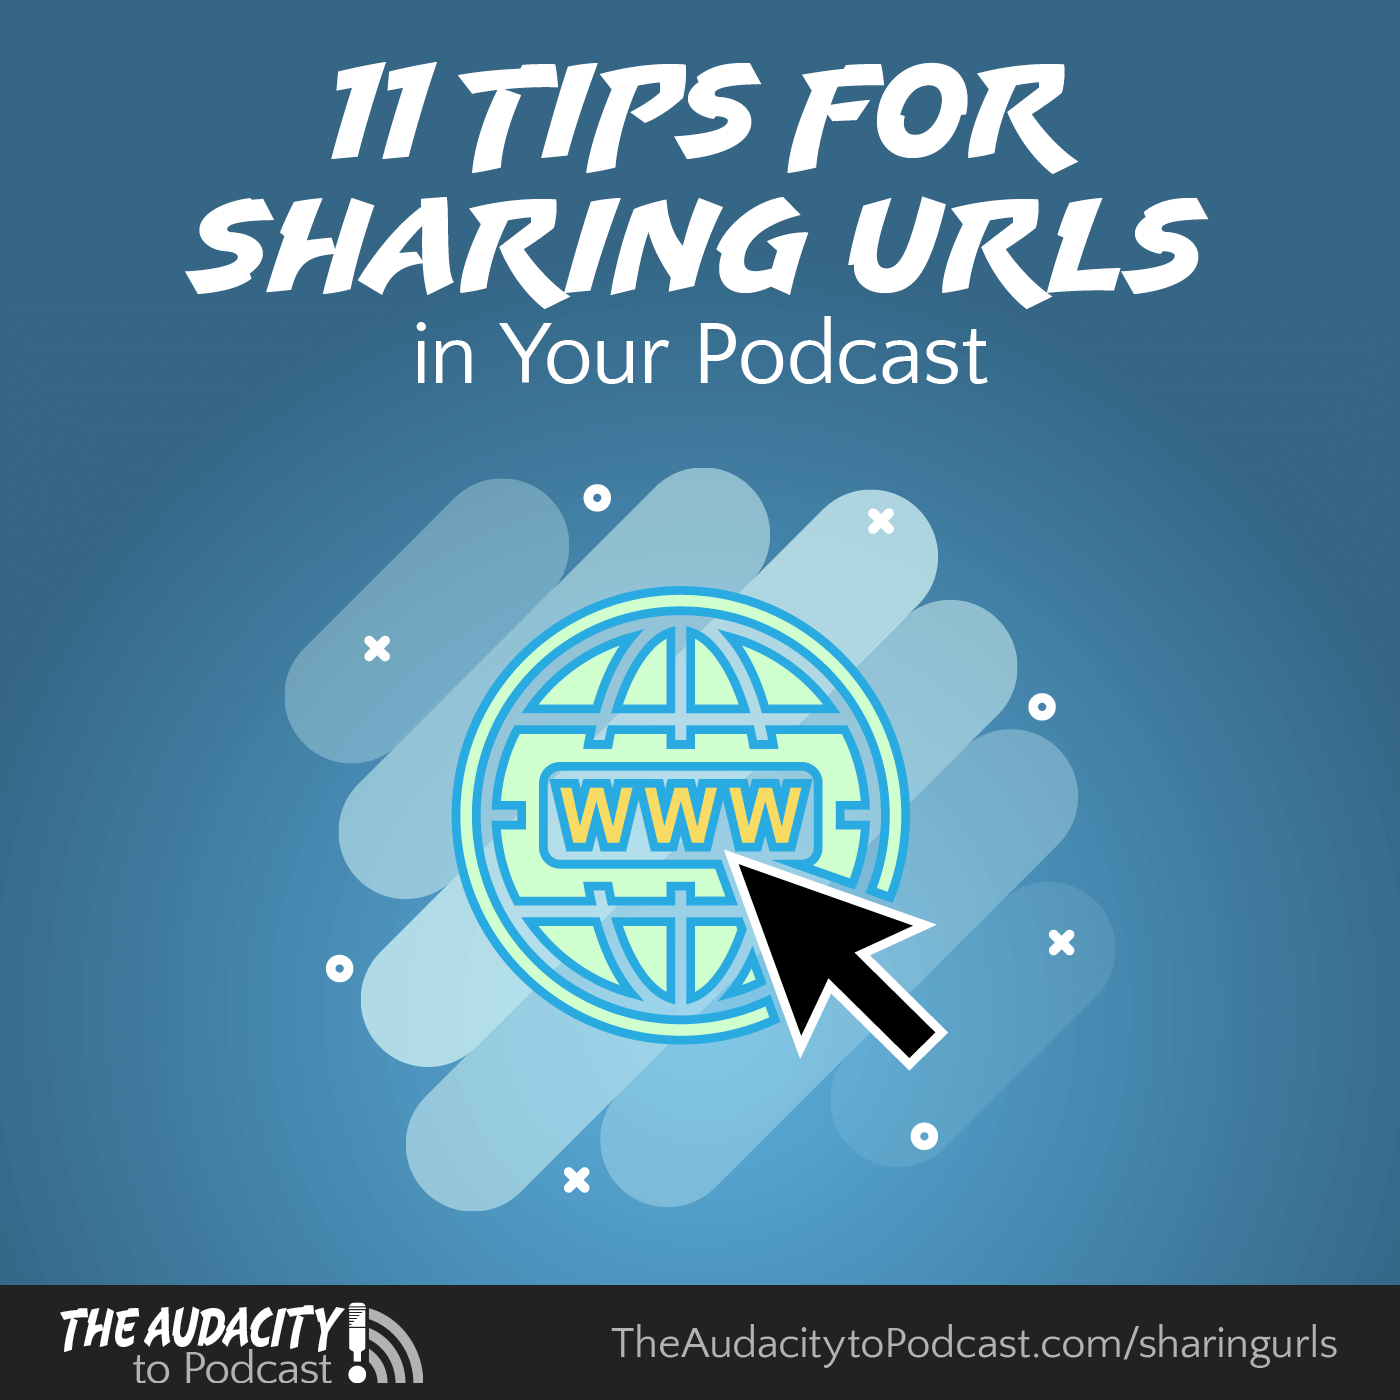 11 Tips for Sharing URLs in Your Podcast